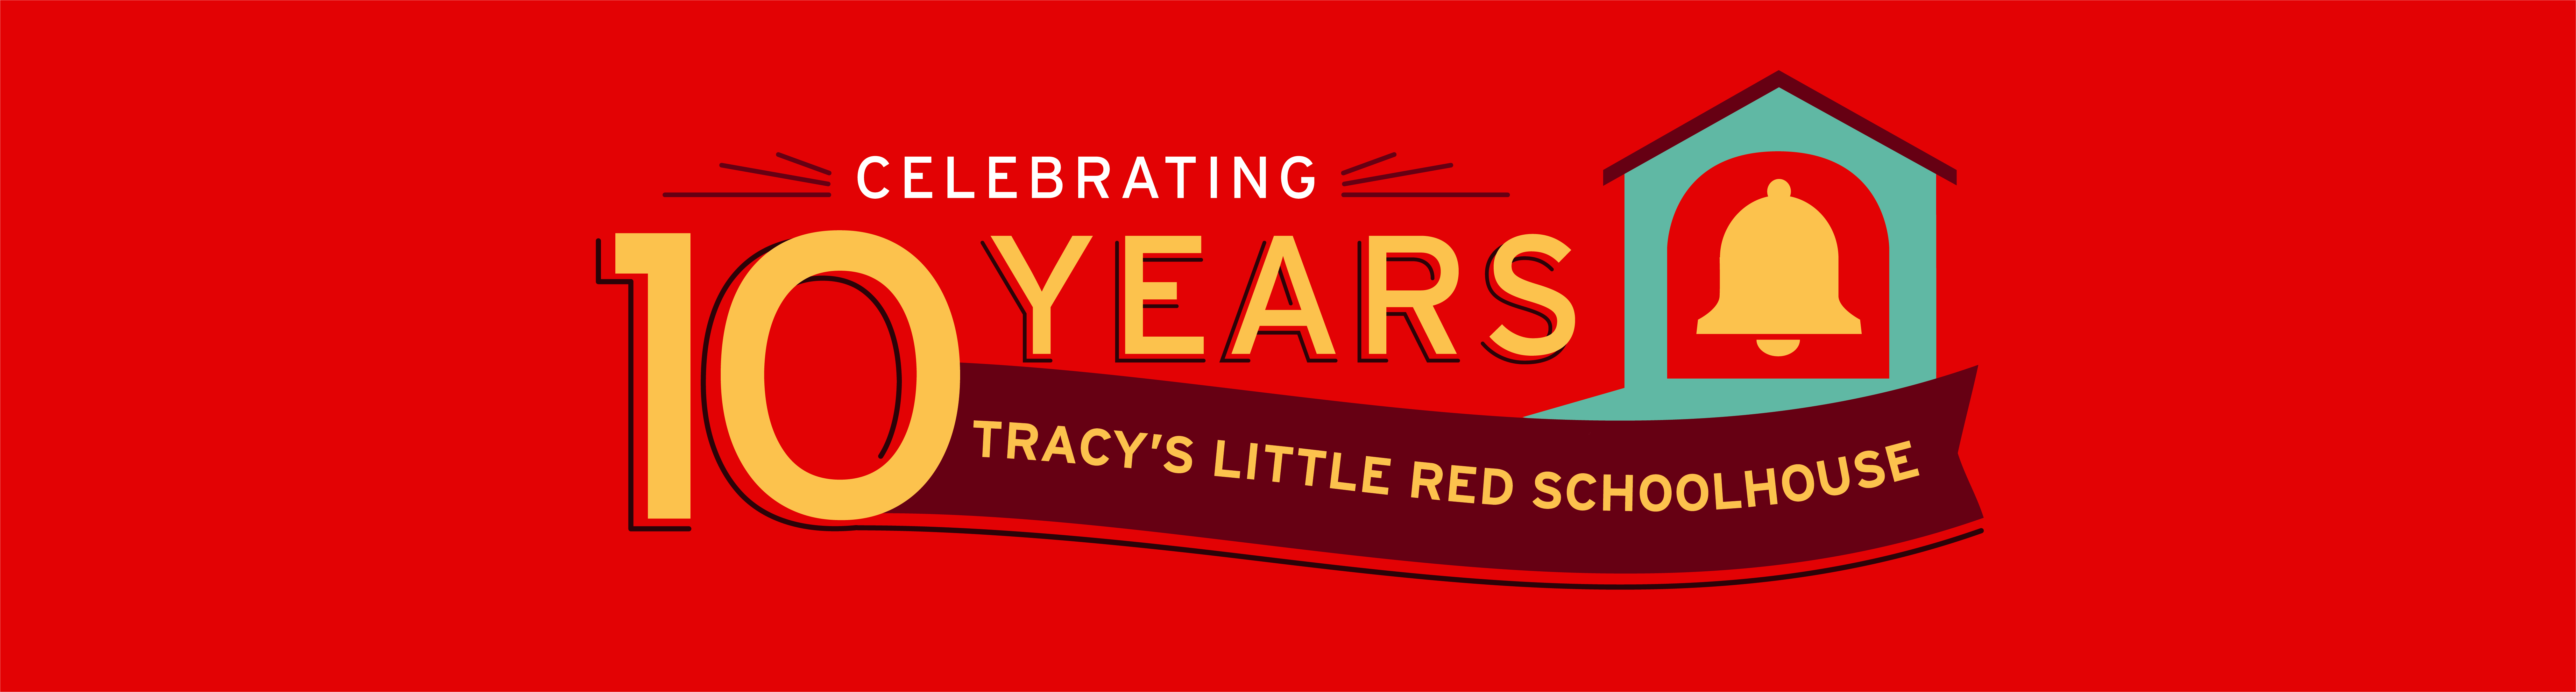 Celebrating 10 Years Tracy's Little Red Schoolhouse